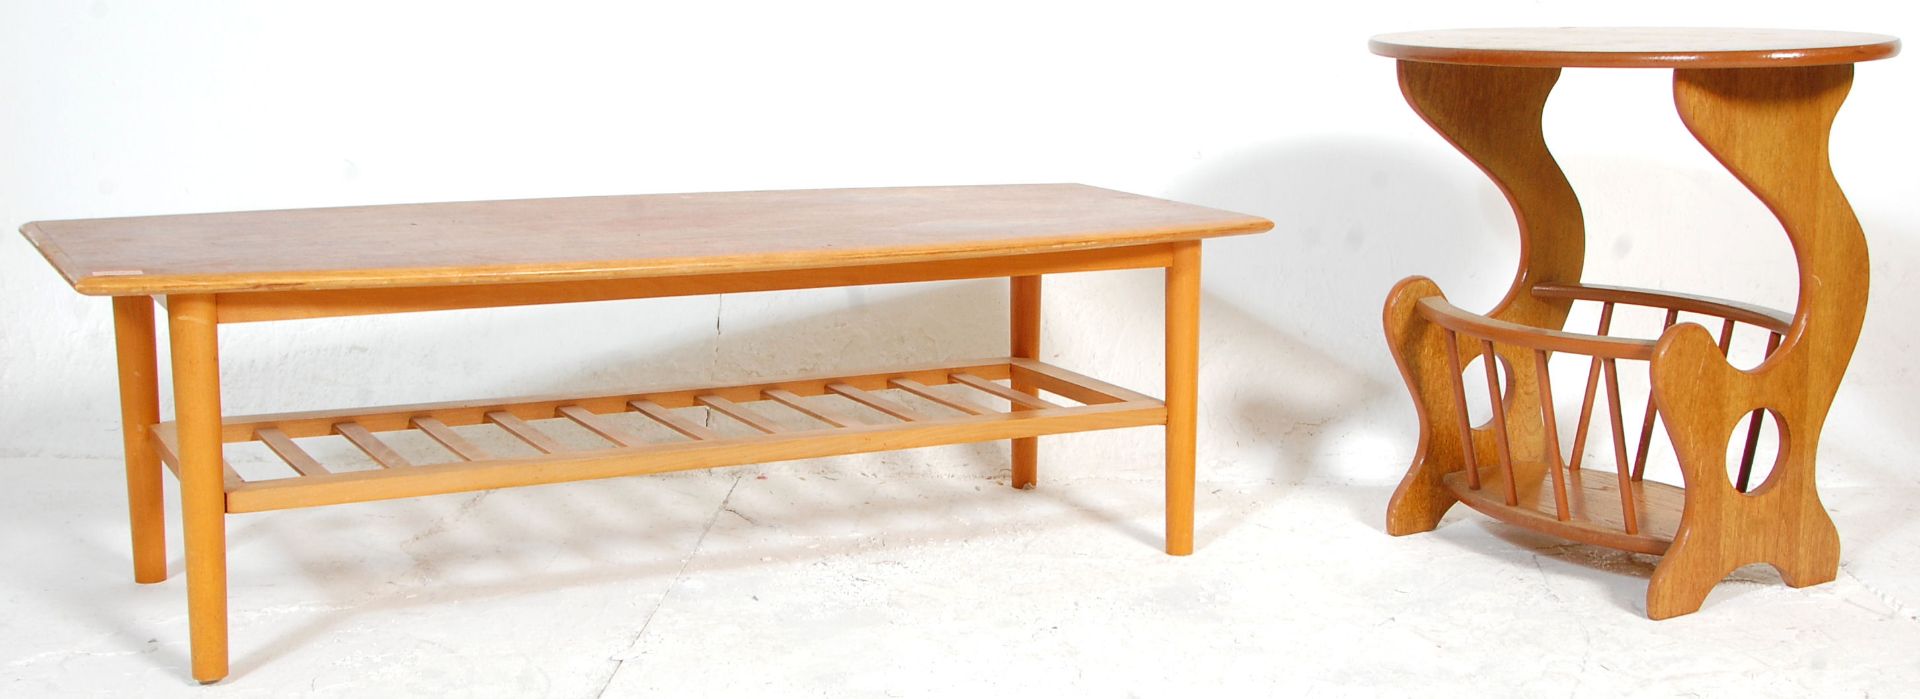 A retro 20th Century Danish inspired surfboard top teak coffee table raised on tapering legs with